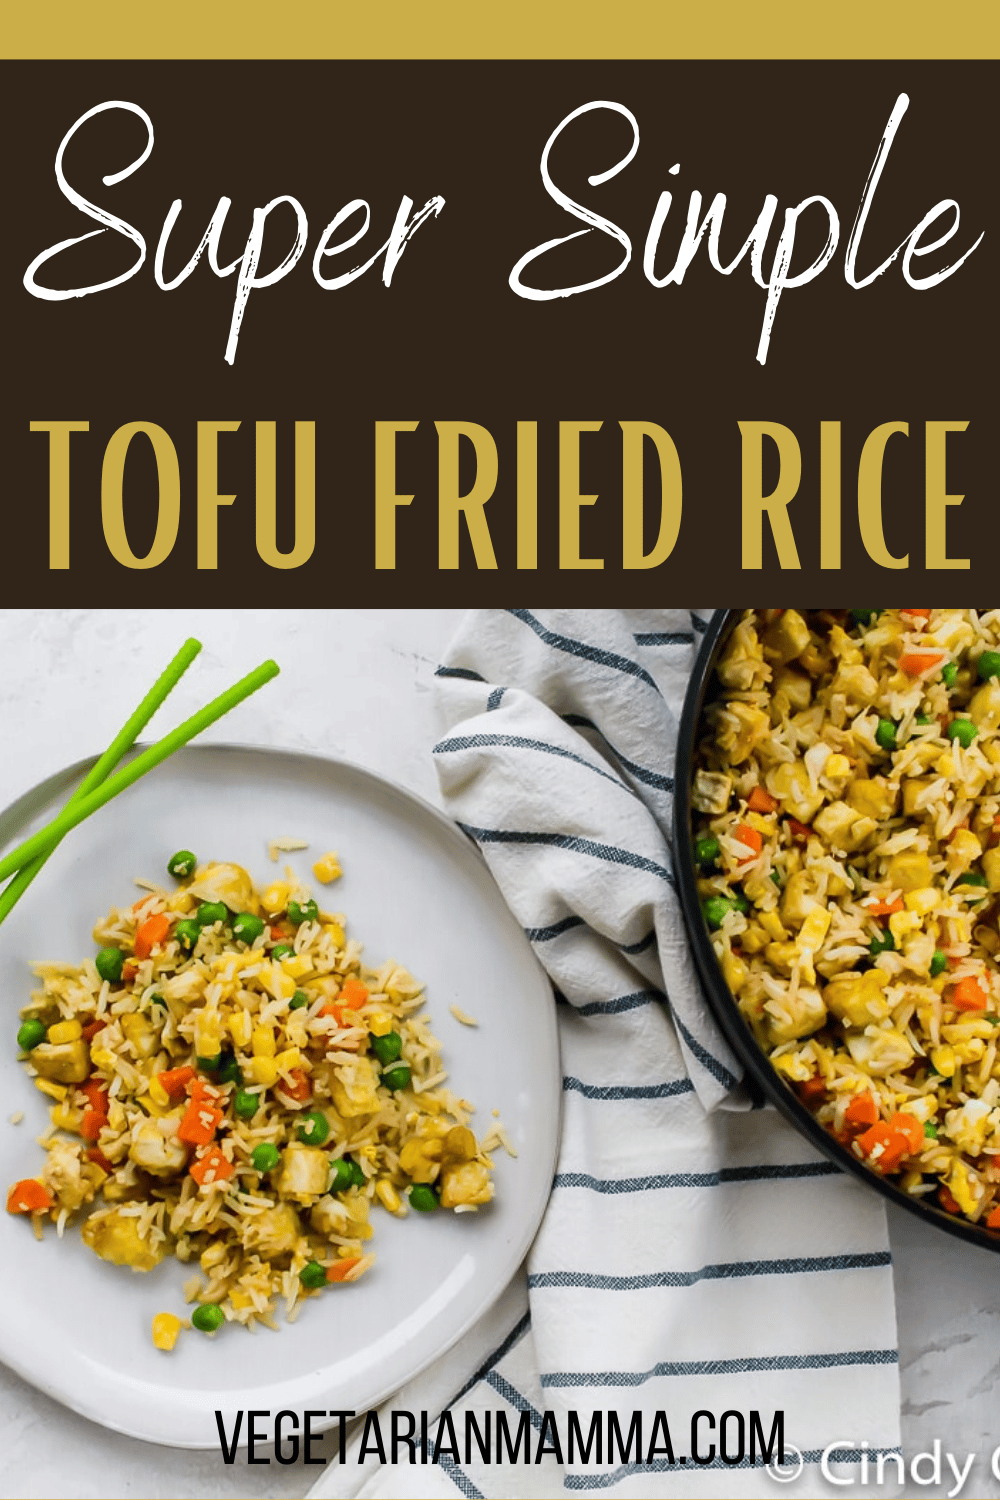 Tofu fried rice is hearty Asian-inspired dish that is filled with hearty protein and veggies. This tofu recipe is fun to make and so flavorful! #friedrice #tofufriedrice #tofurecipes